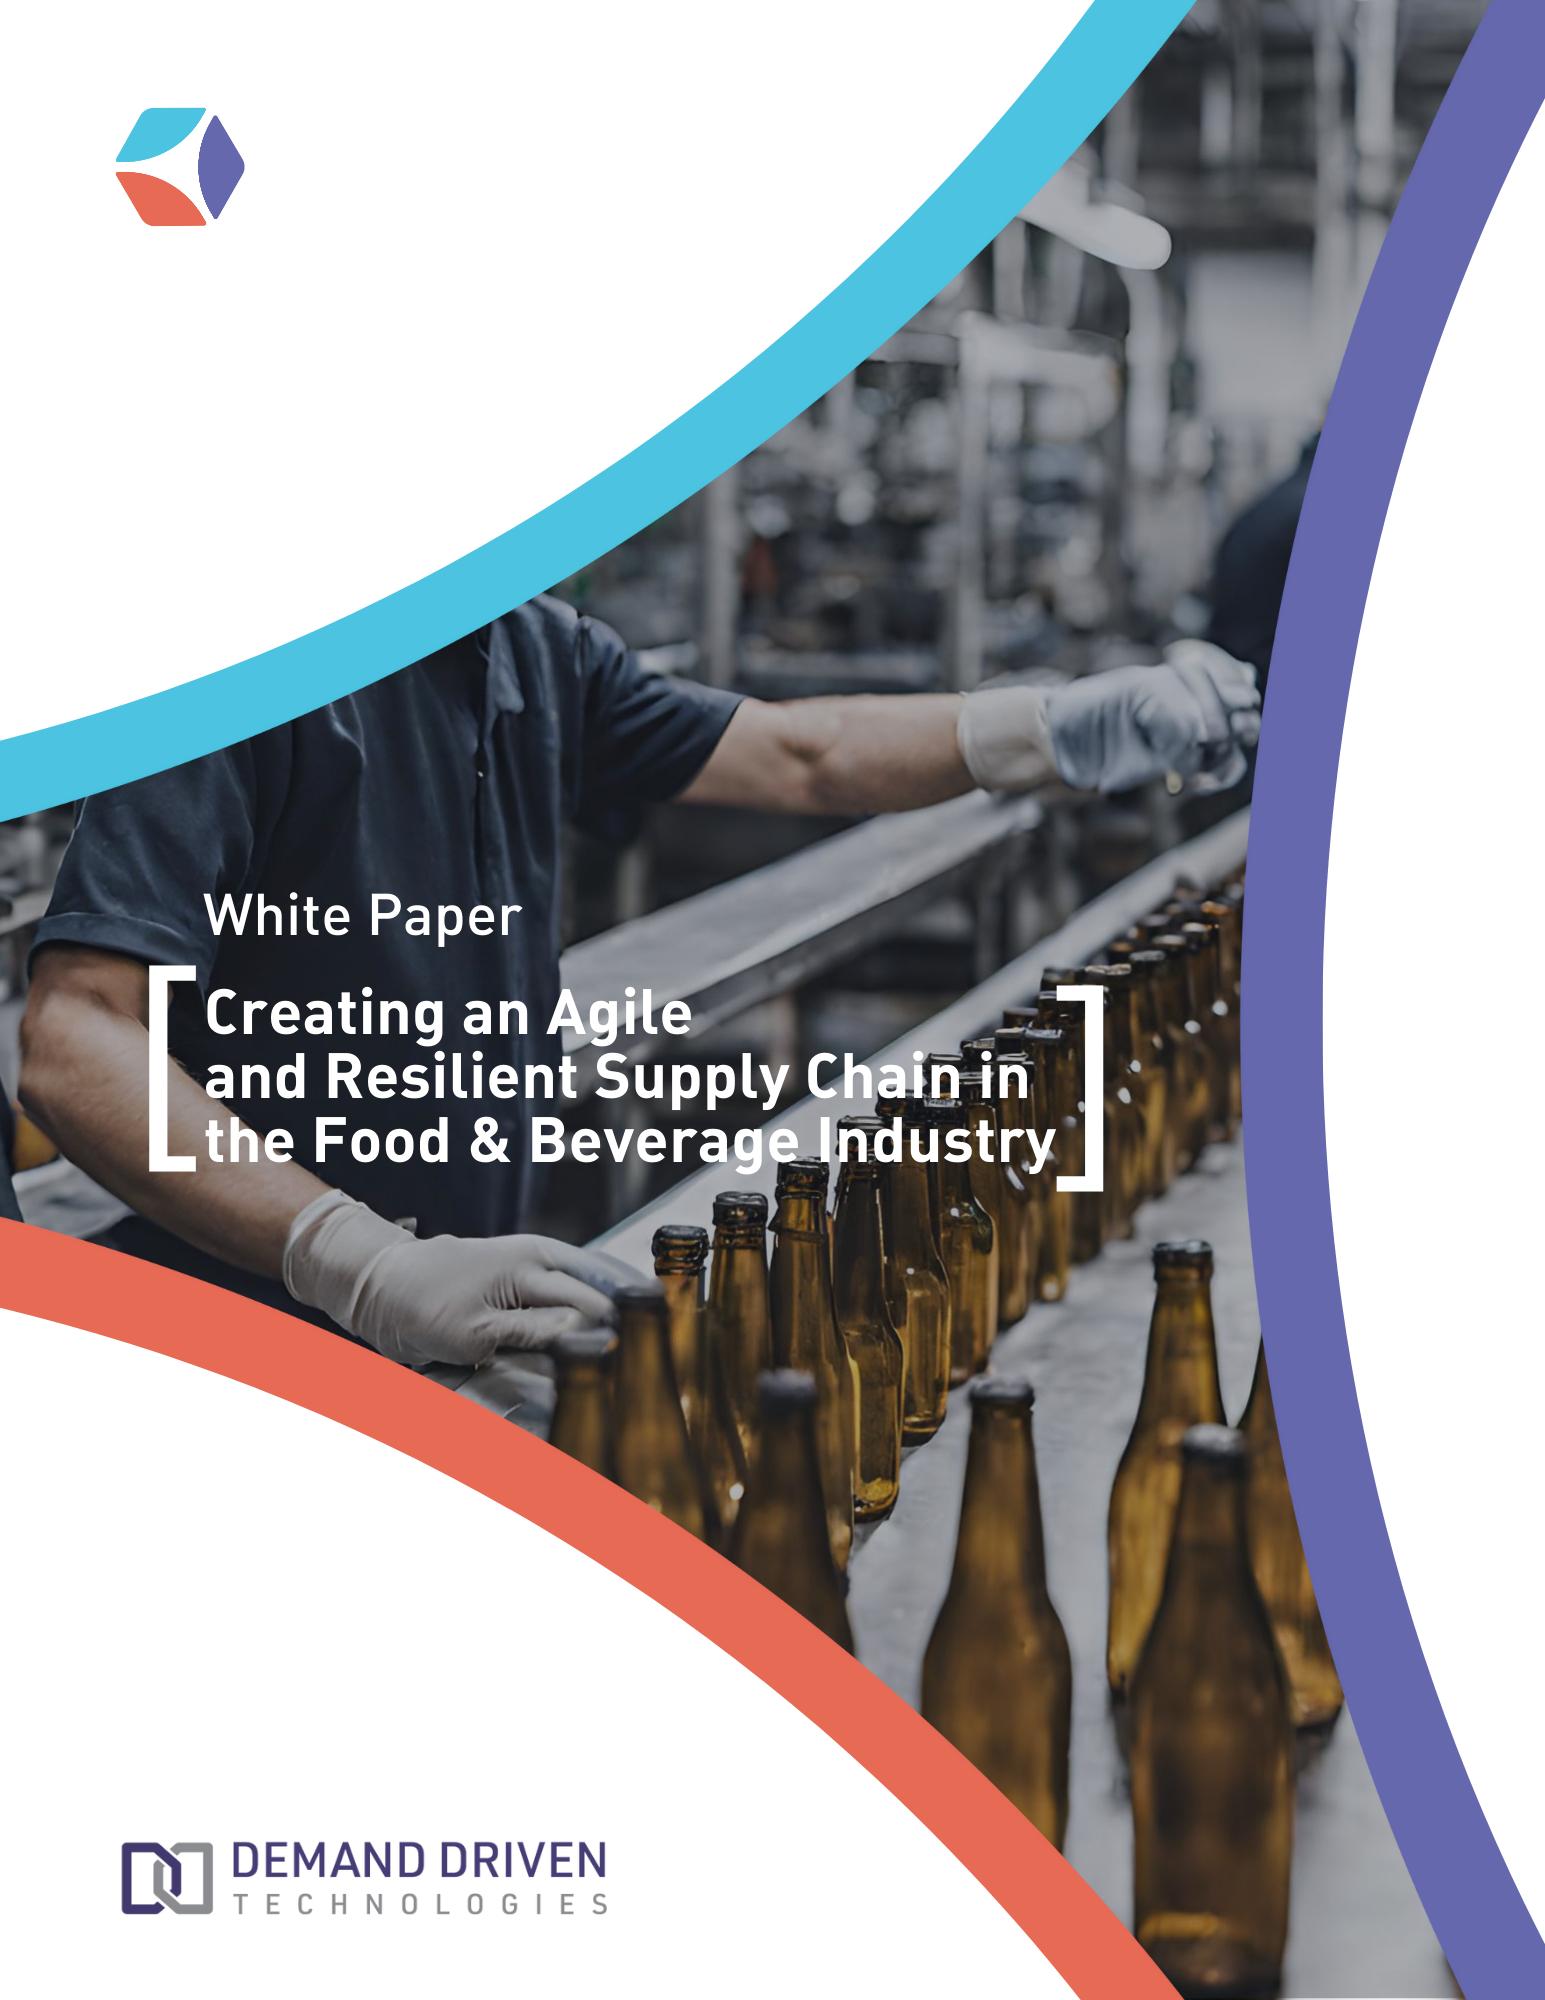 Creating an Agile and Resilient Supply Chain in the Food & Beverage Industry